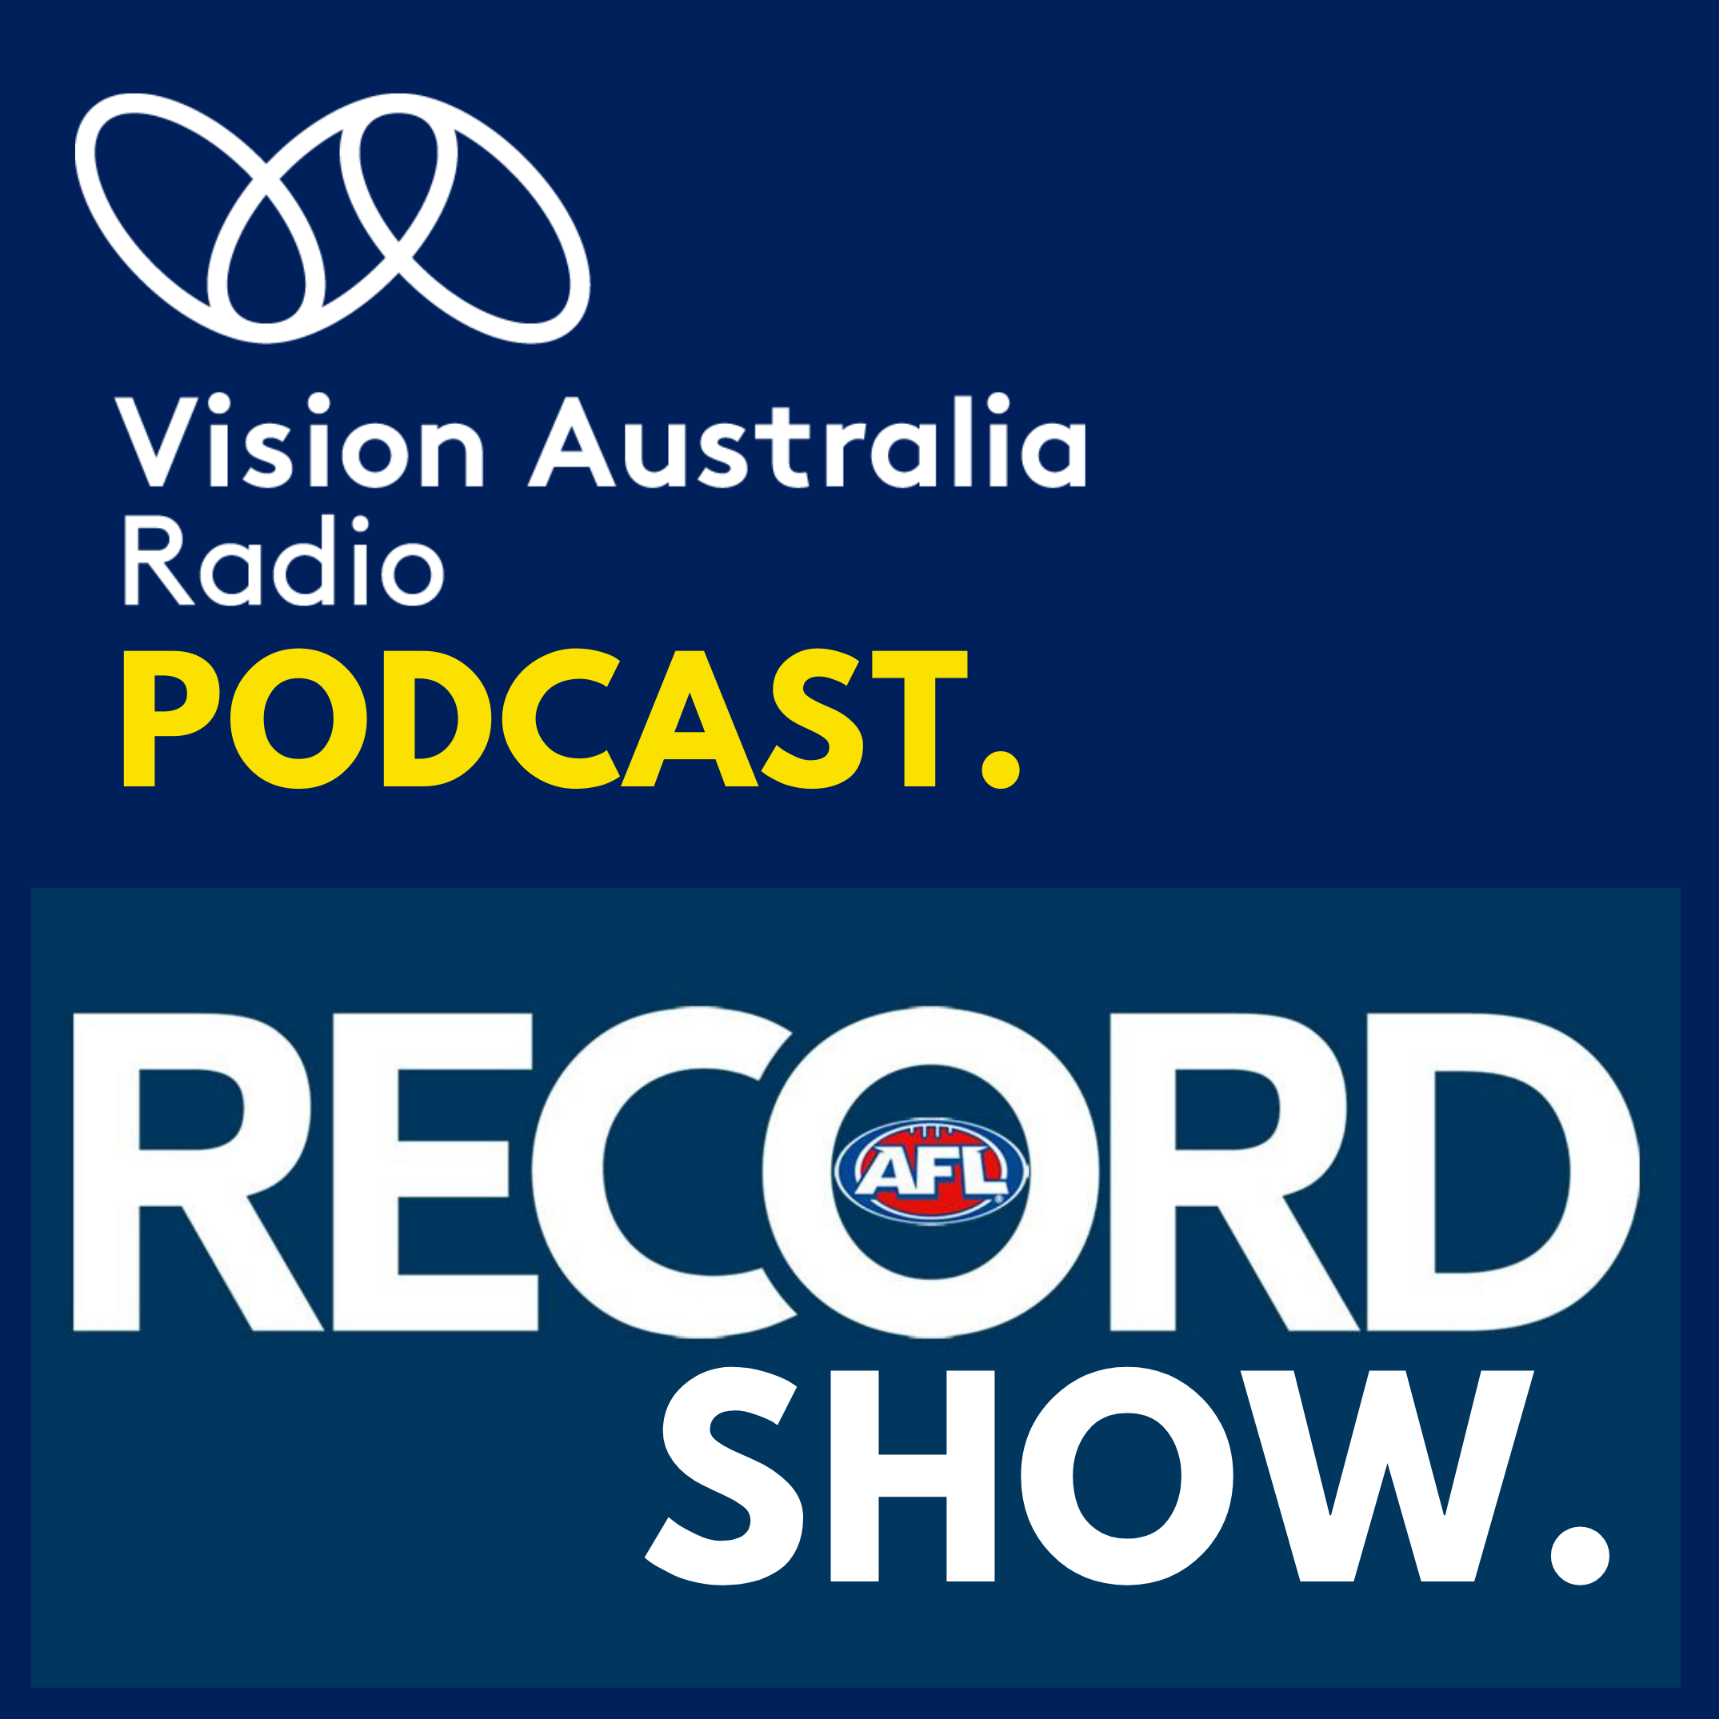 NEW: AFL Record Show - Round 10, 2021